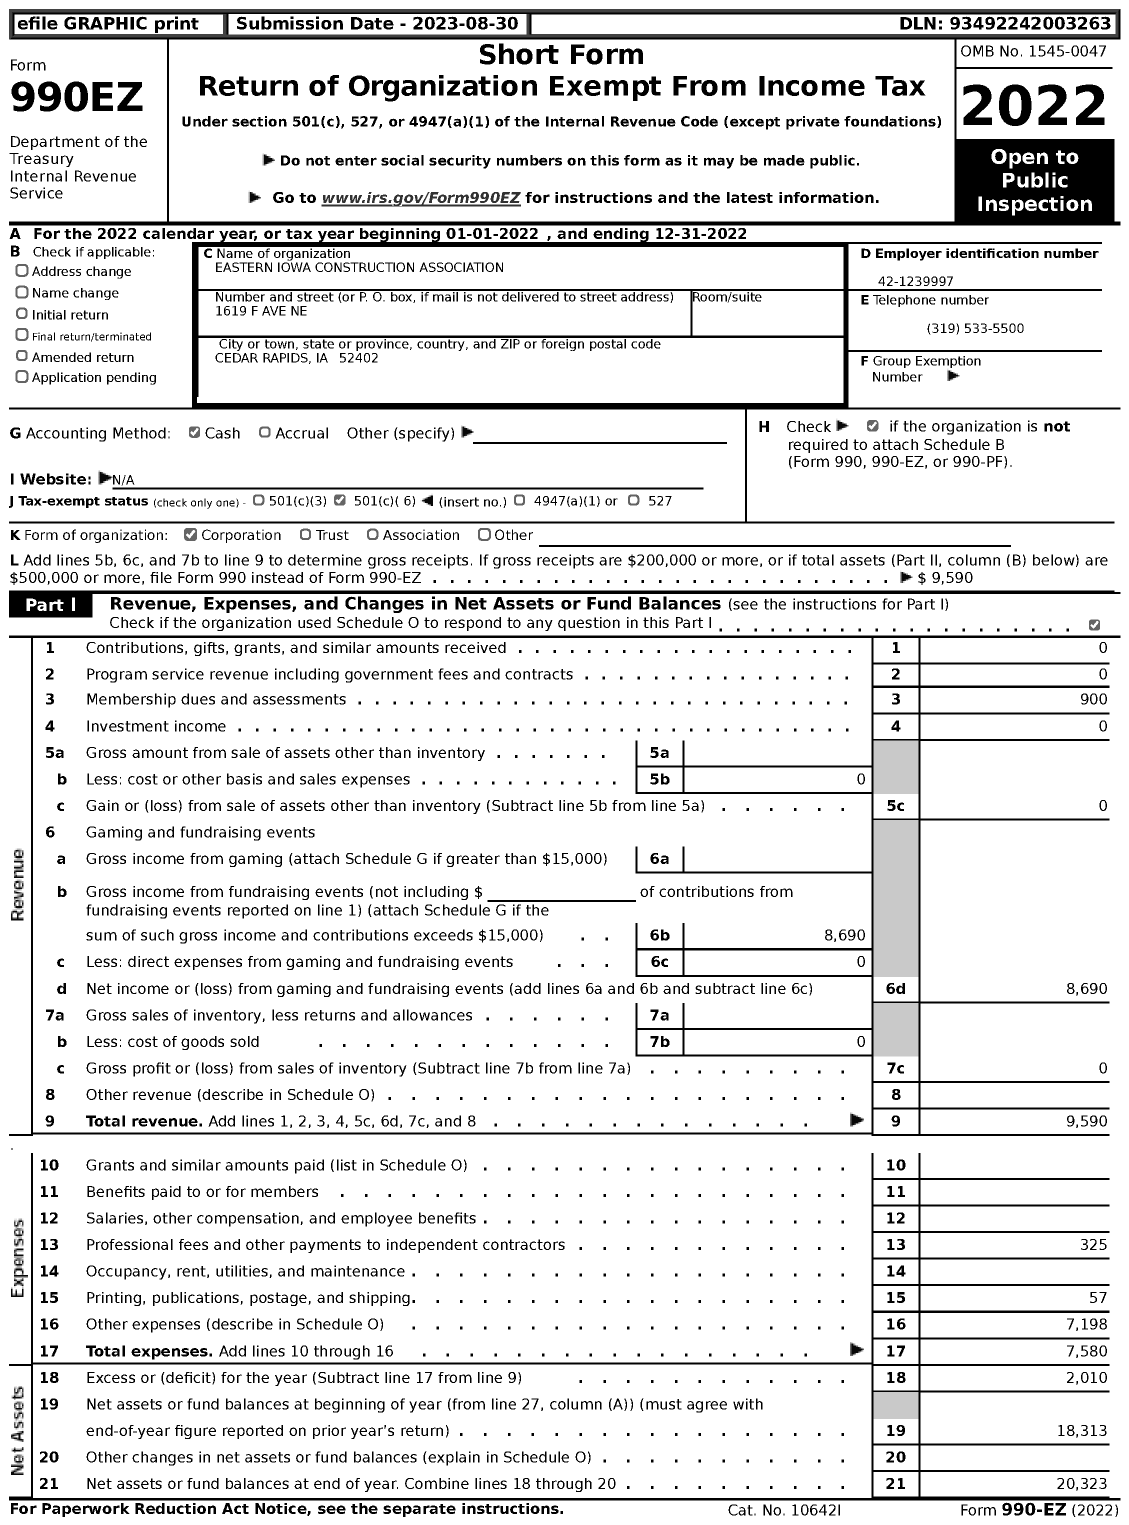 Image of first page of 2022 Form 990EZ for Eastern Iowa Construction Association